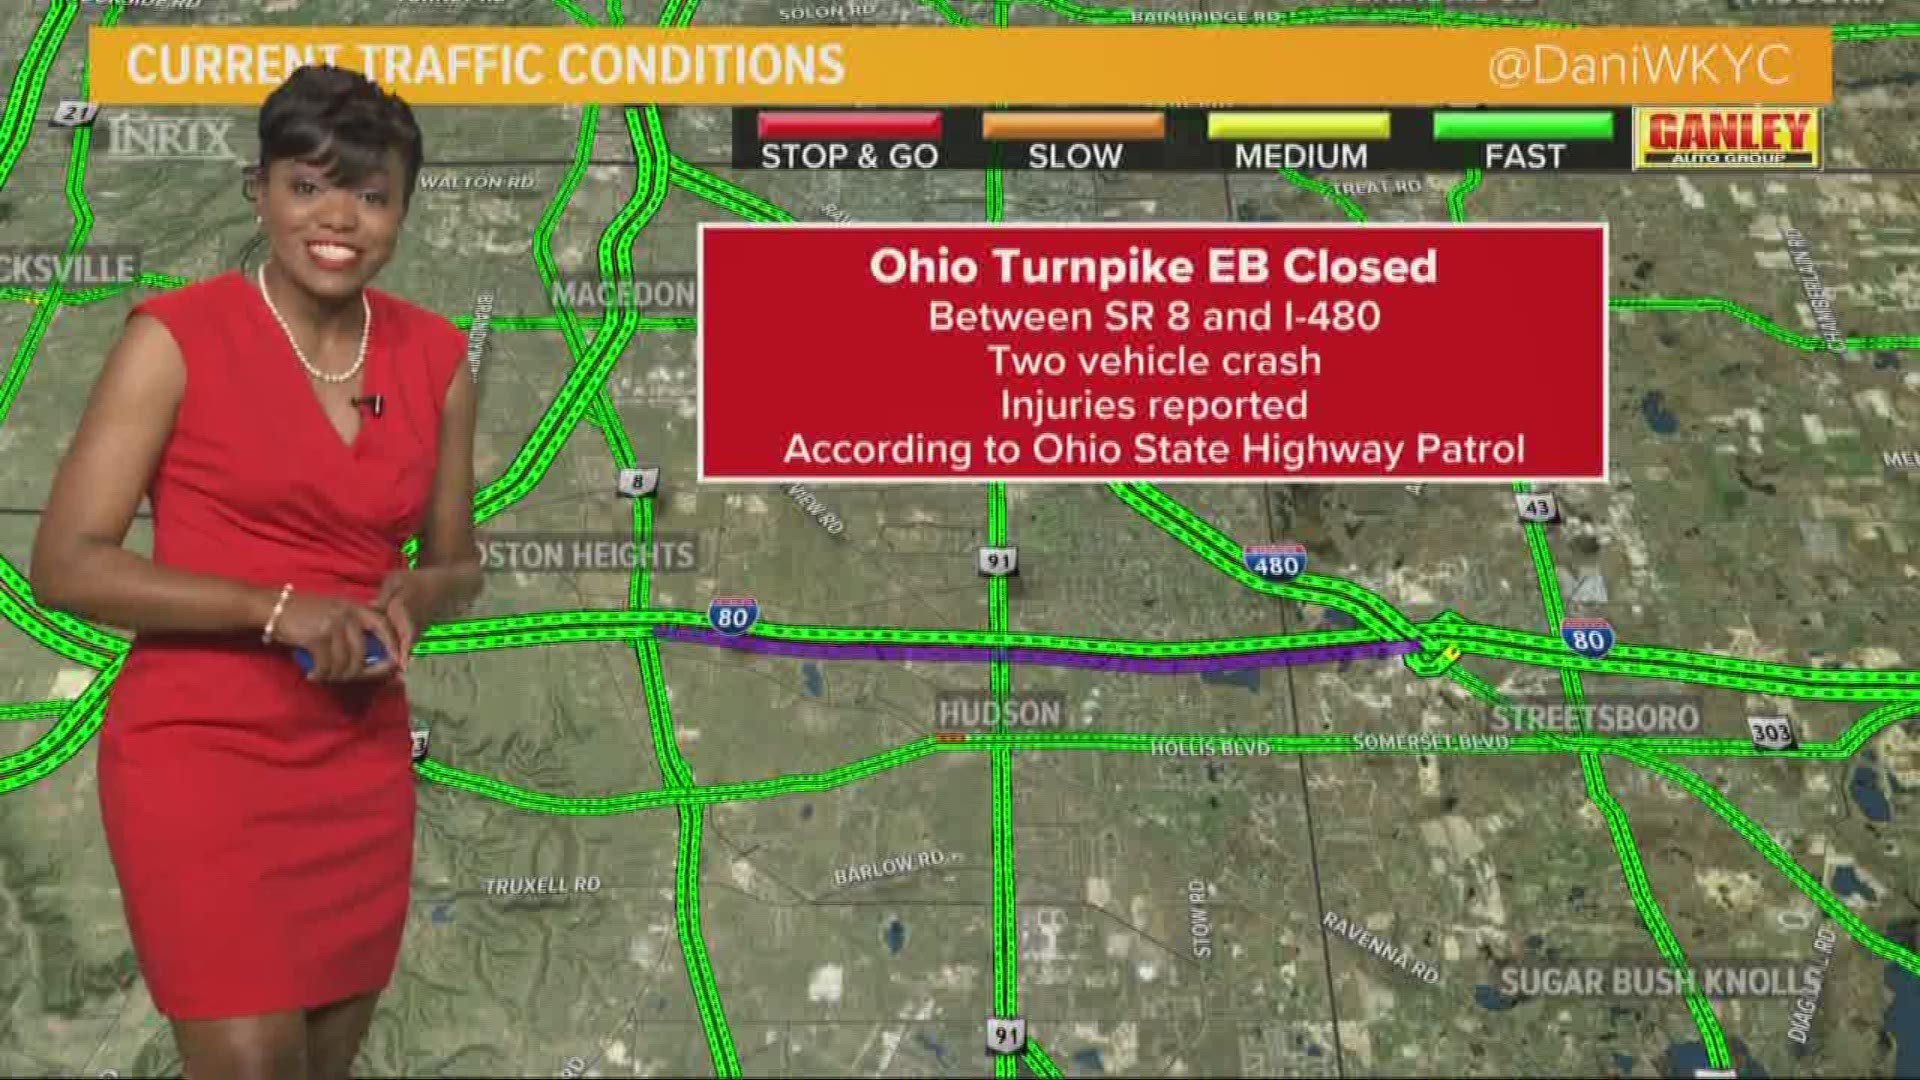 April 11, 2018: A temporary detour is in effect as crews have closed all eastbound lanes of the Ohio Turnpike at Route 8 in Summit County. Officials tell WKYC the crash involves injuries with two vehicles involved.